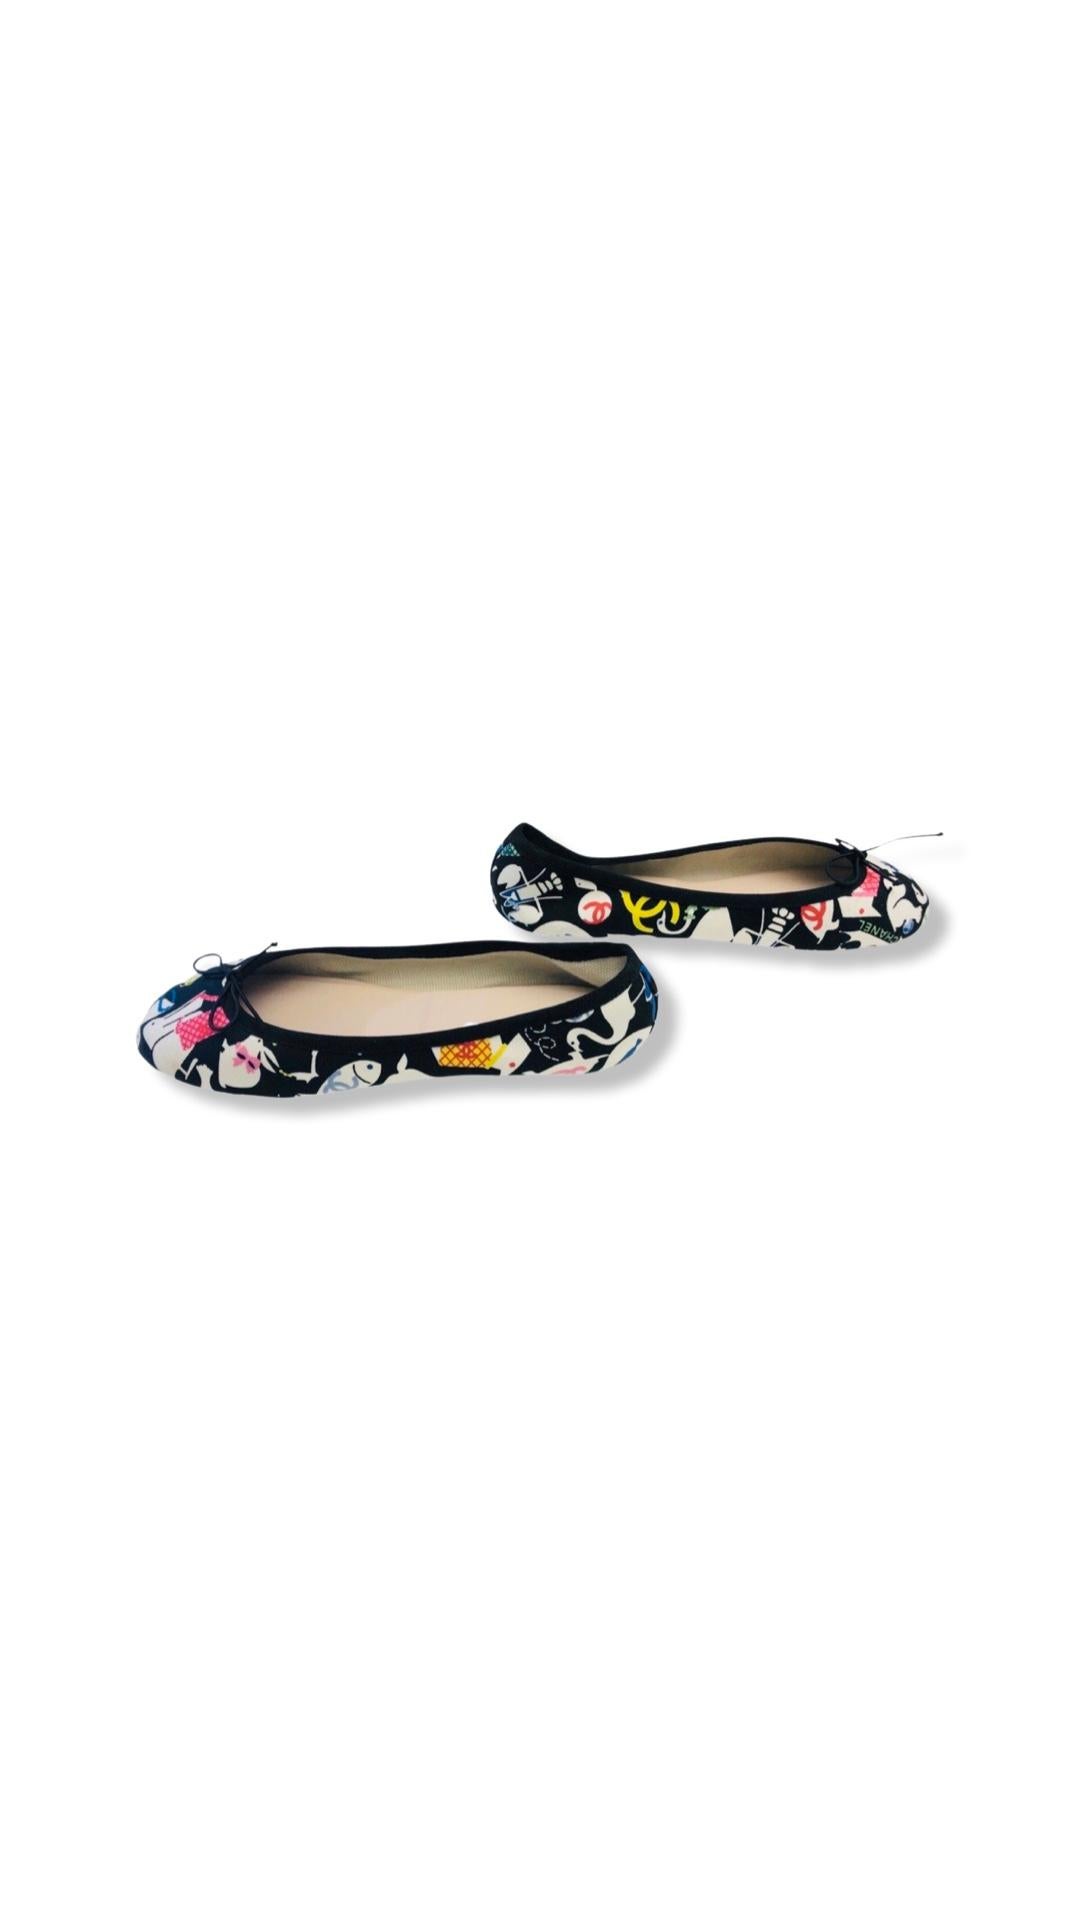 - Chanel multi coloured canvas printed flats. 

- Size 39. 

